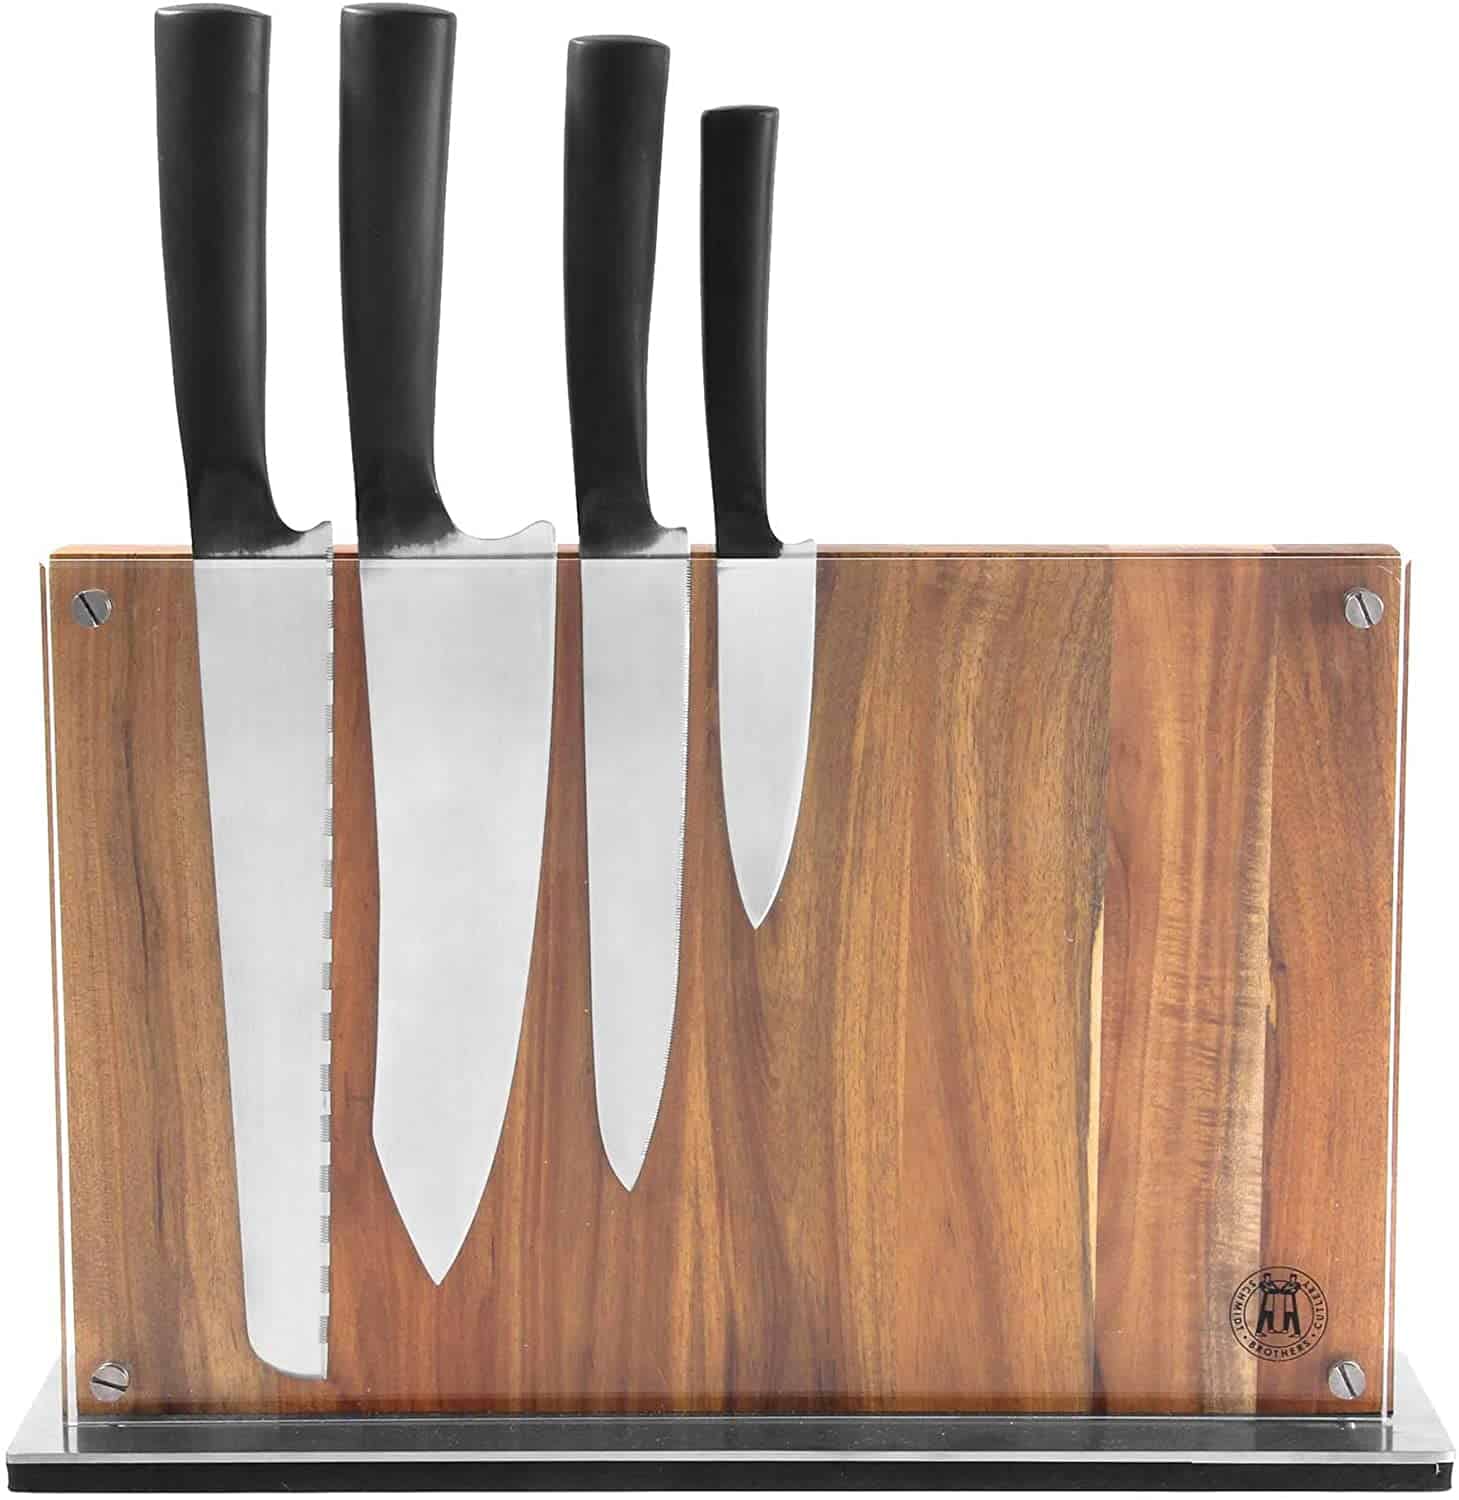 Best magnetic knife block- Schmidt Brothers Acacia Downtown